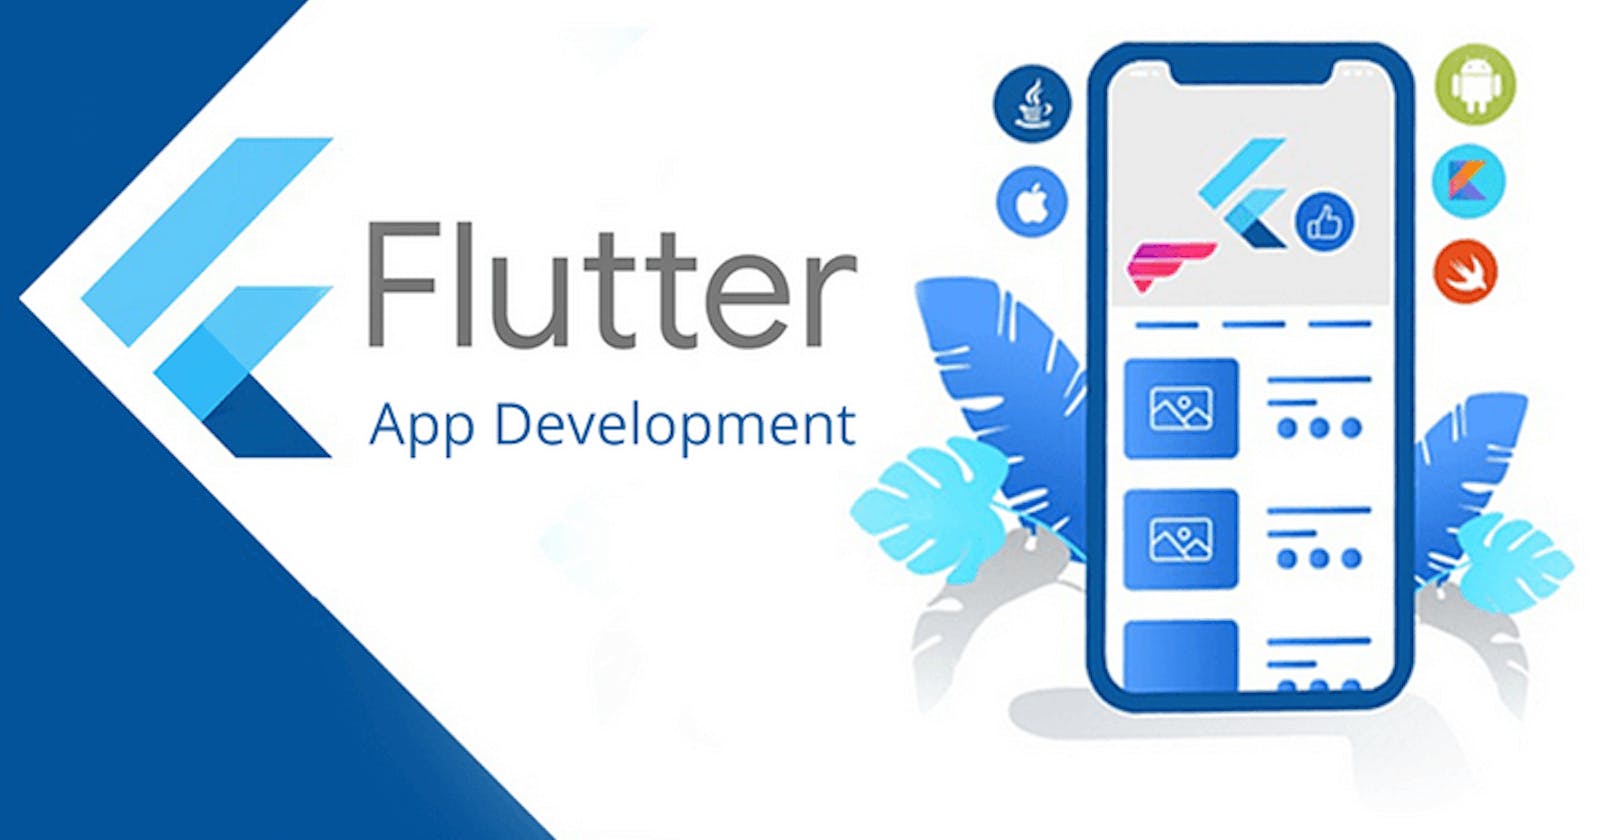 What is Flutter, and what does it do?